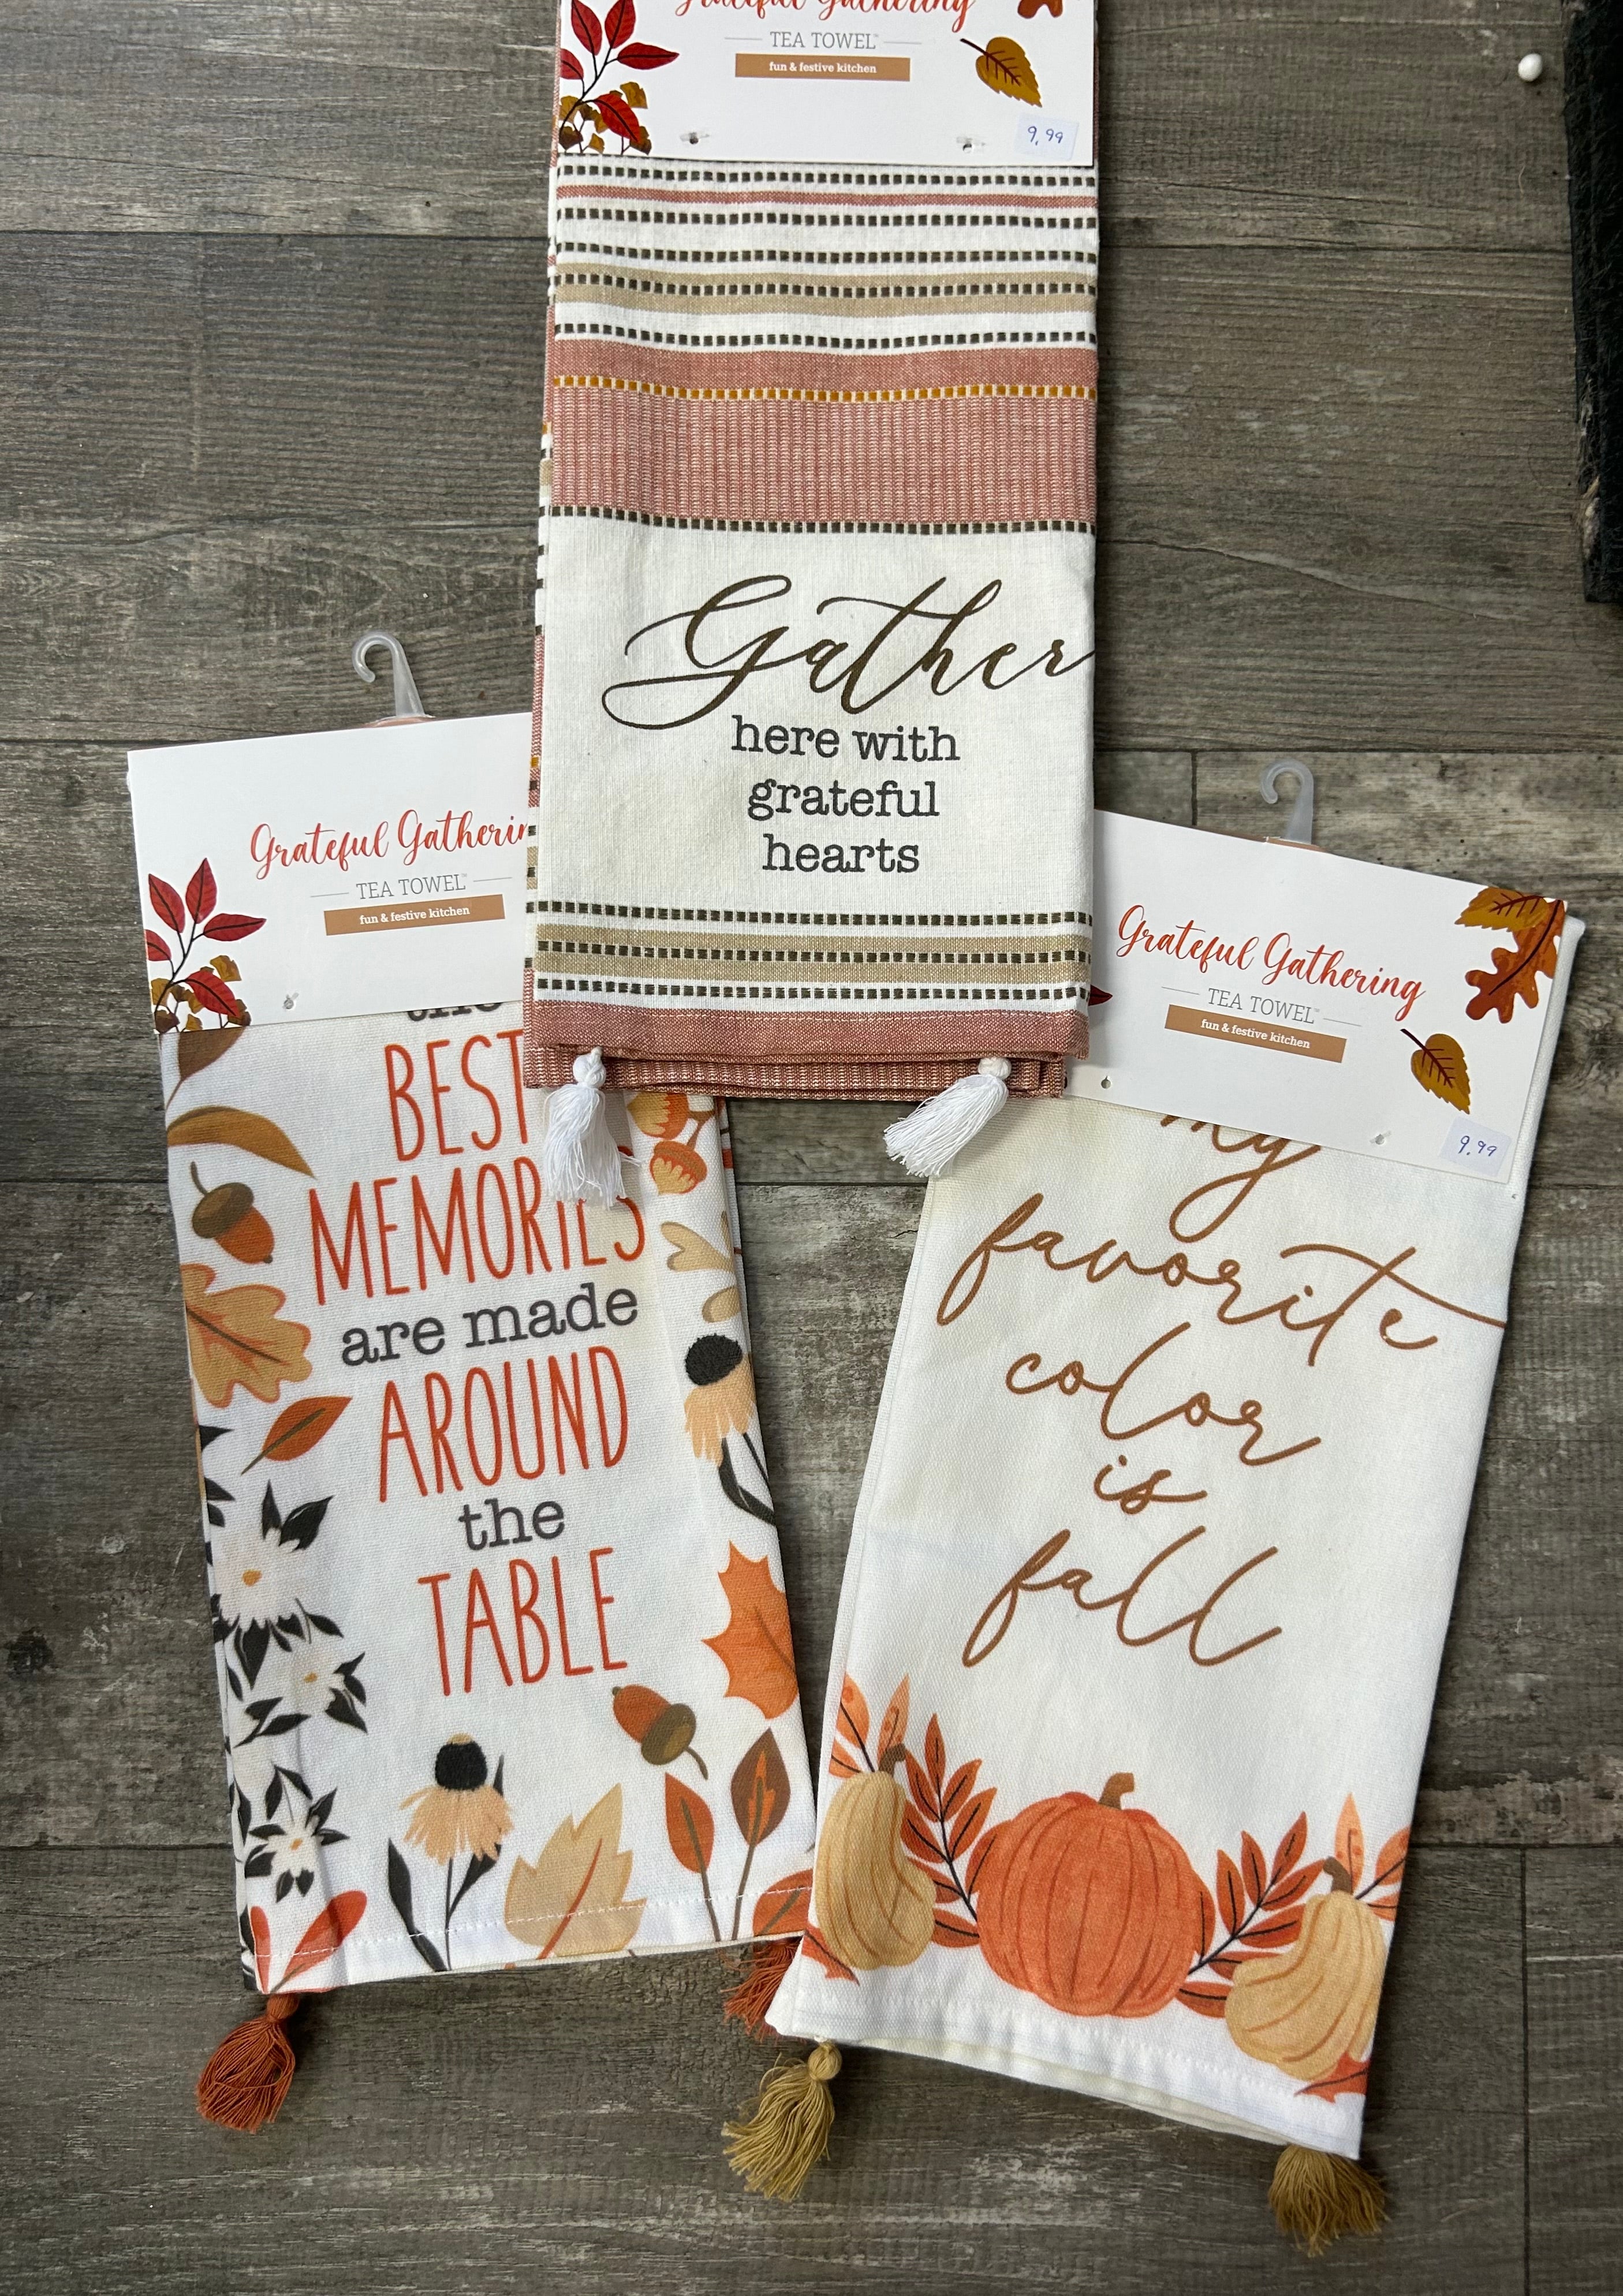 4 Pieces Funny Kitchen Towels Set Cute Quotes Dish Towels with Sayings, Fun  White Farmhouse Absorbe - Towels & Washcloths, Facebook Marketplace